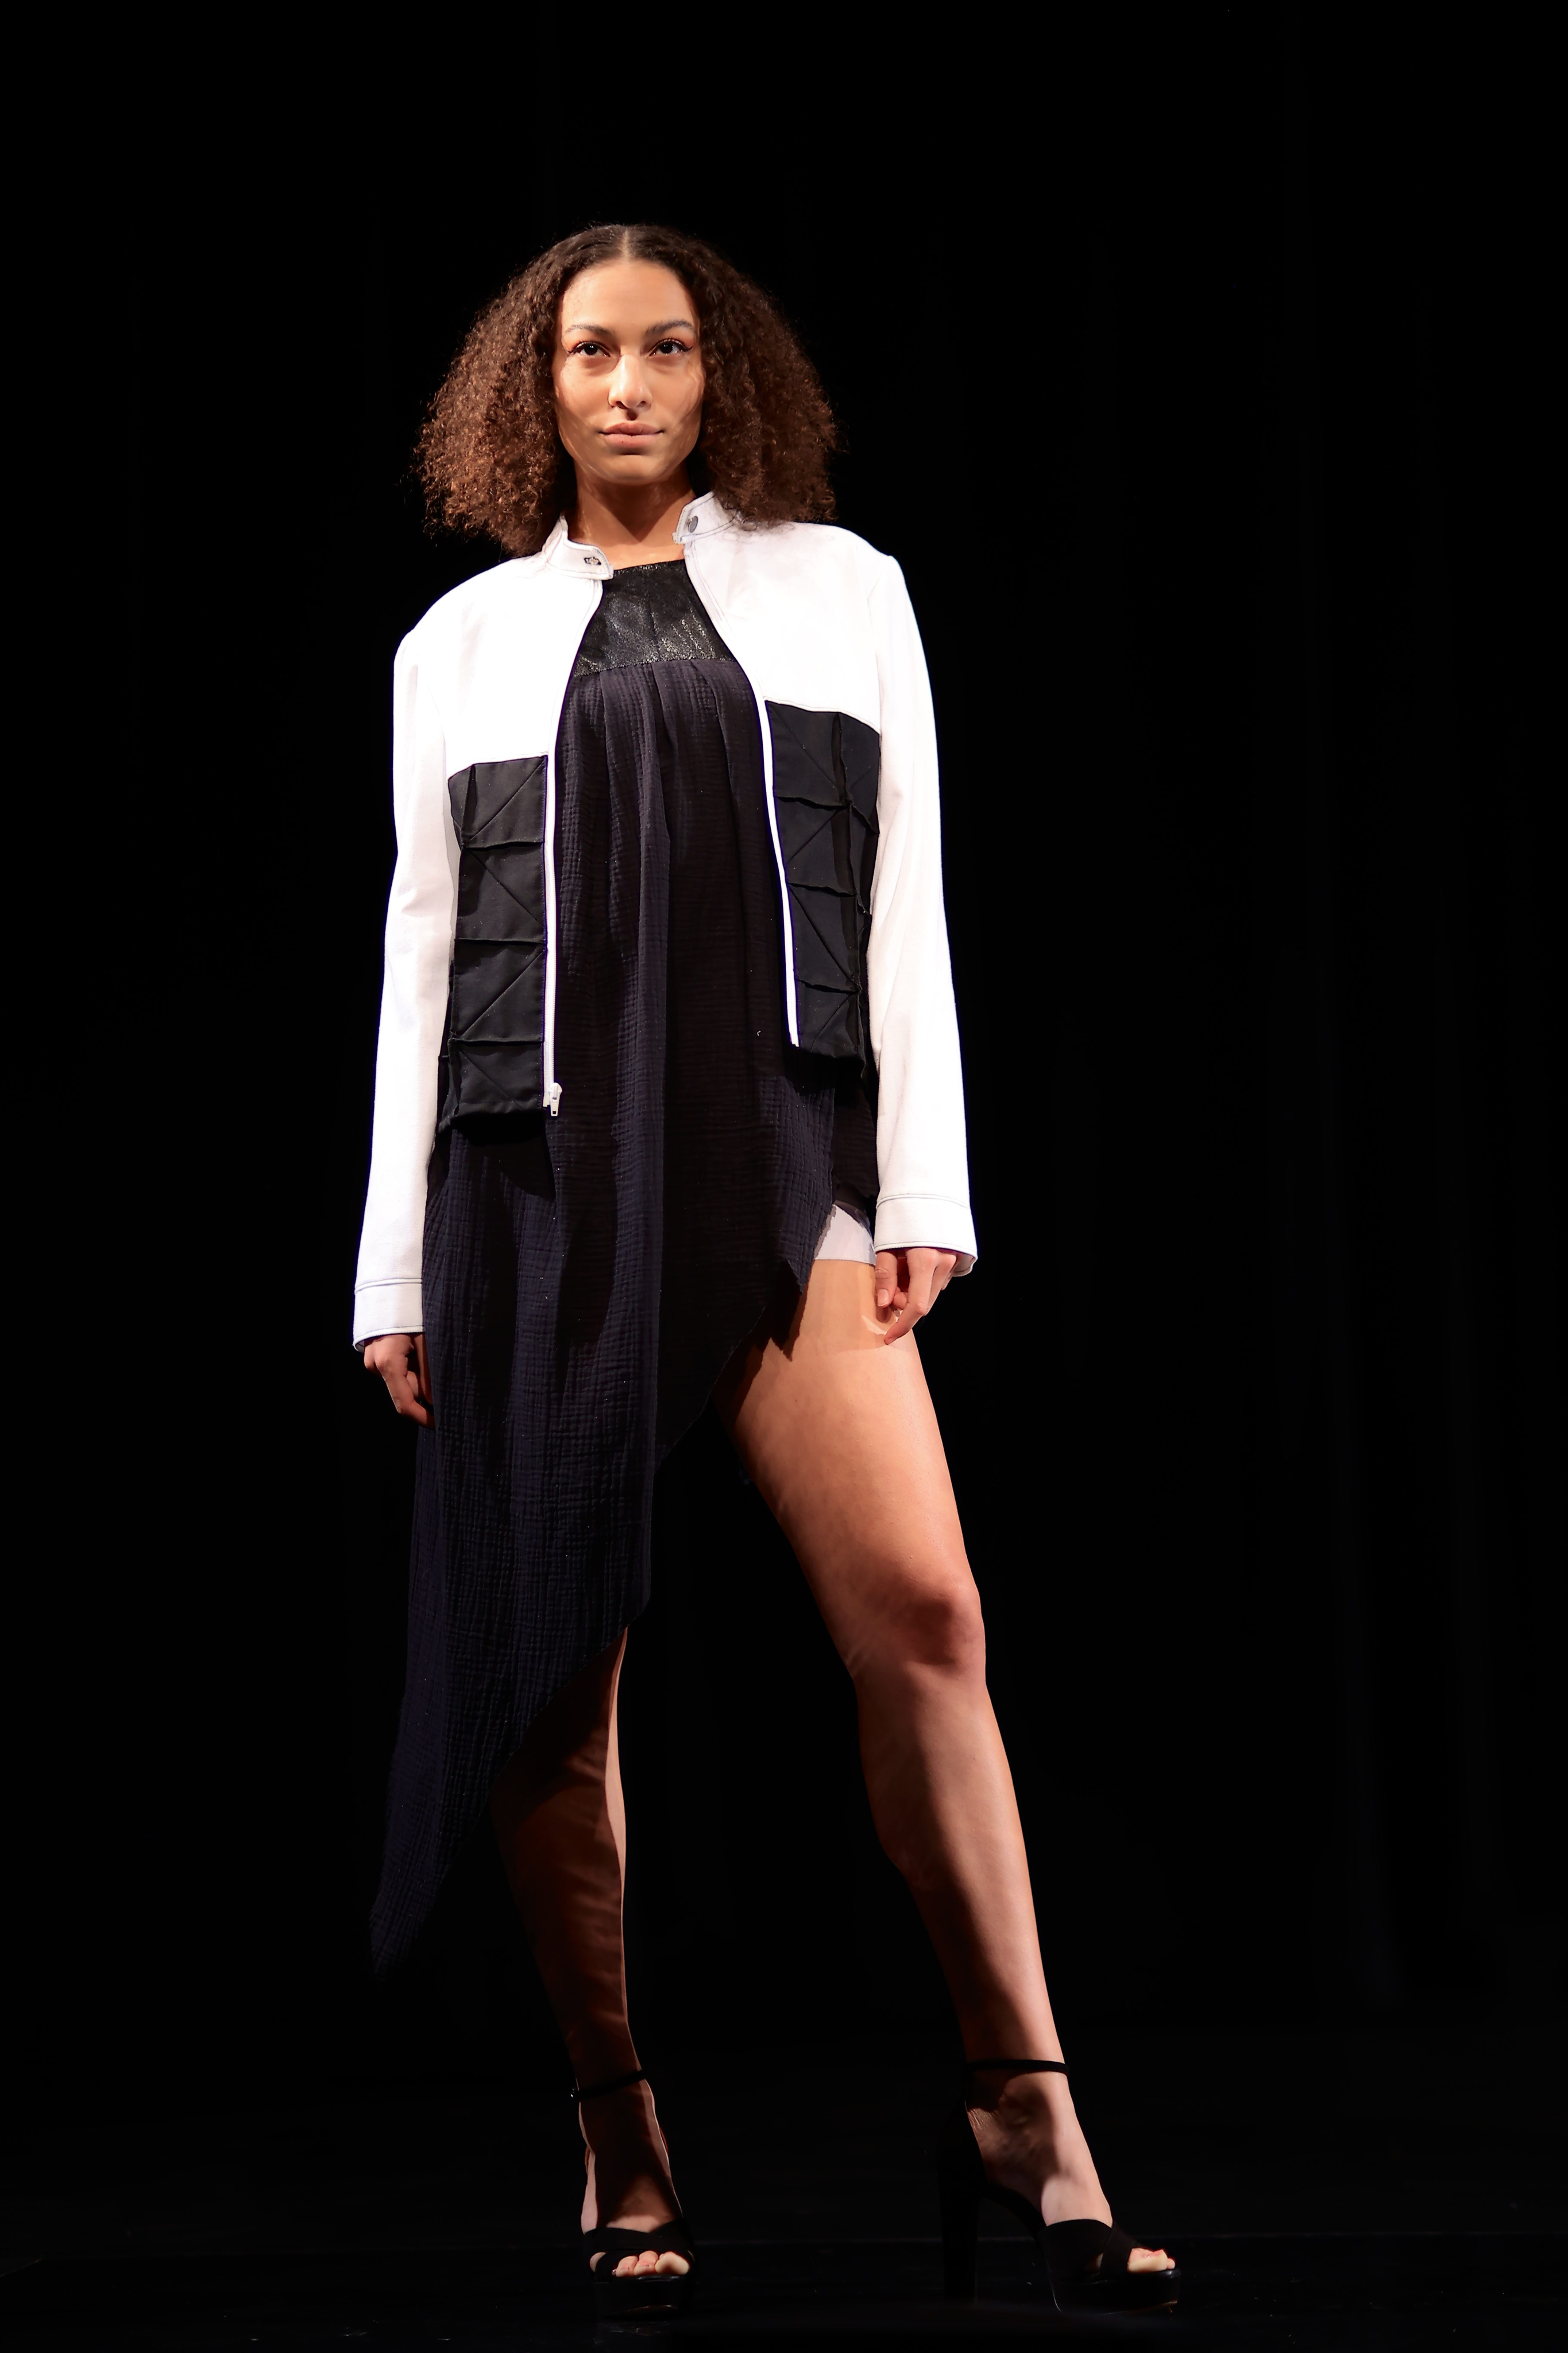 A model dress in a black dress, black heels, and a white and black jacket.